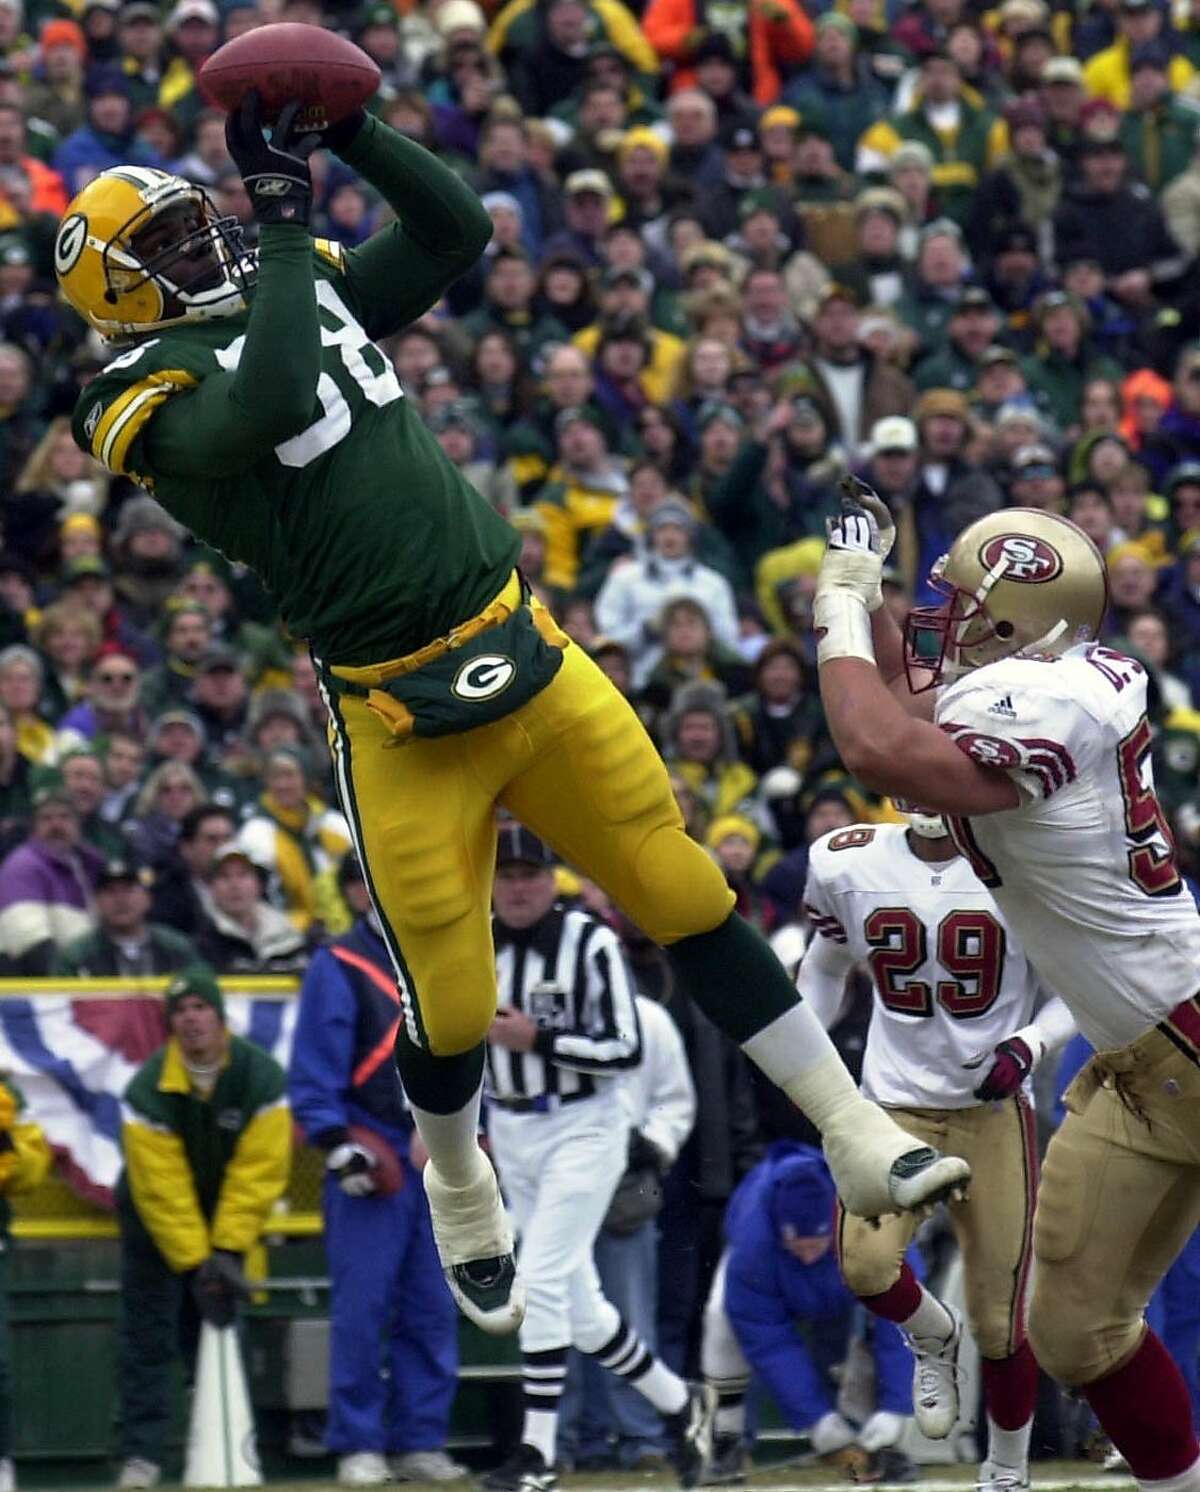 Packers vs. 49ers top games, playoff history in Super Bowl era